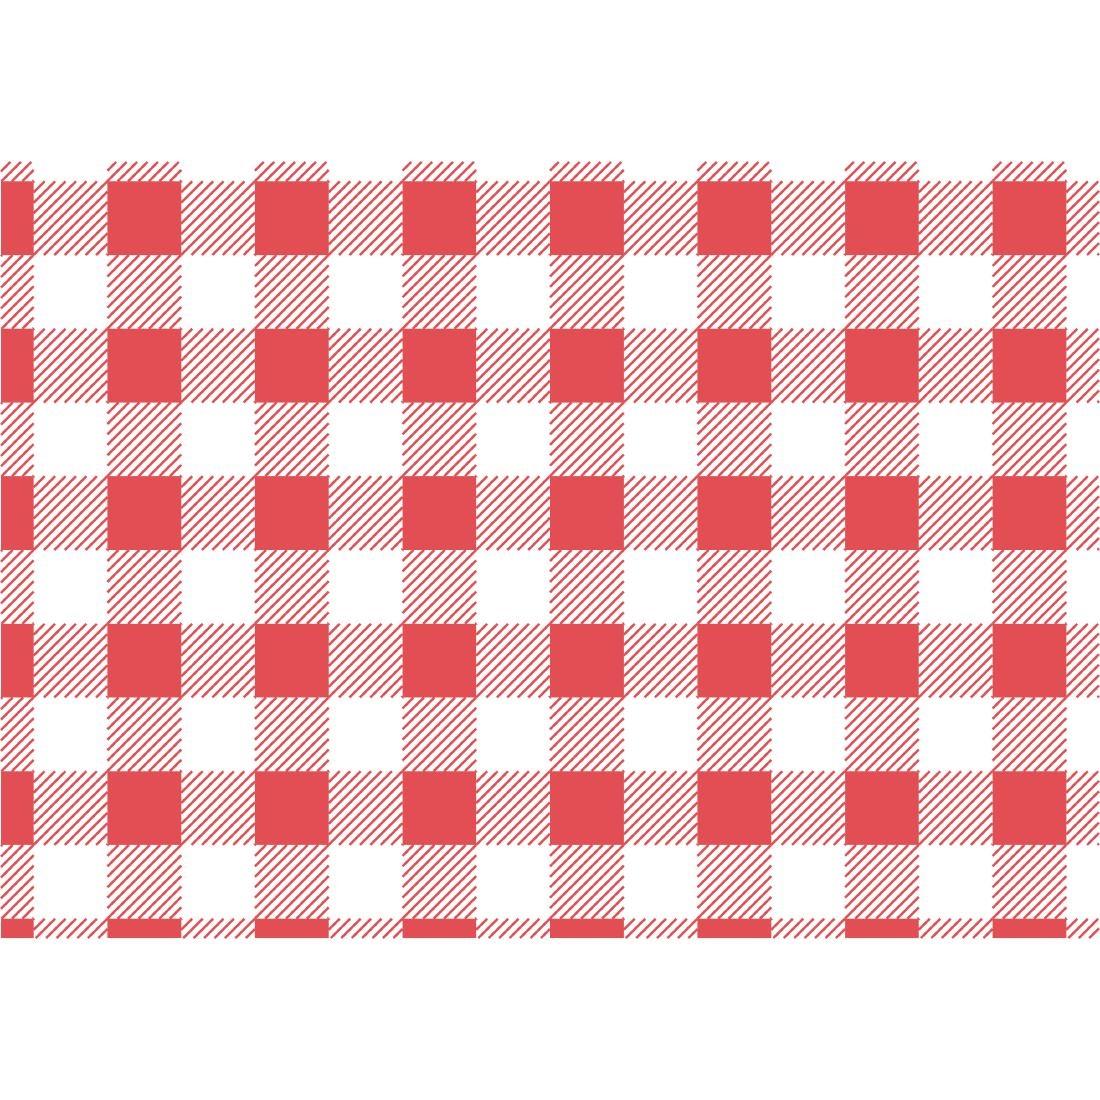 Greaseproof Paper Sheets Red Gingham 310 x 380mm (Pack of 200) - CL659  - 1